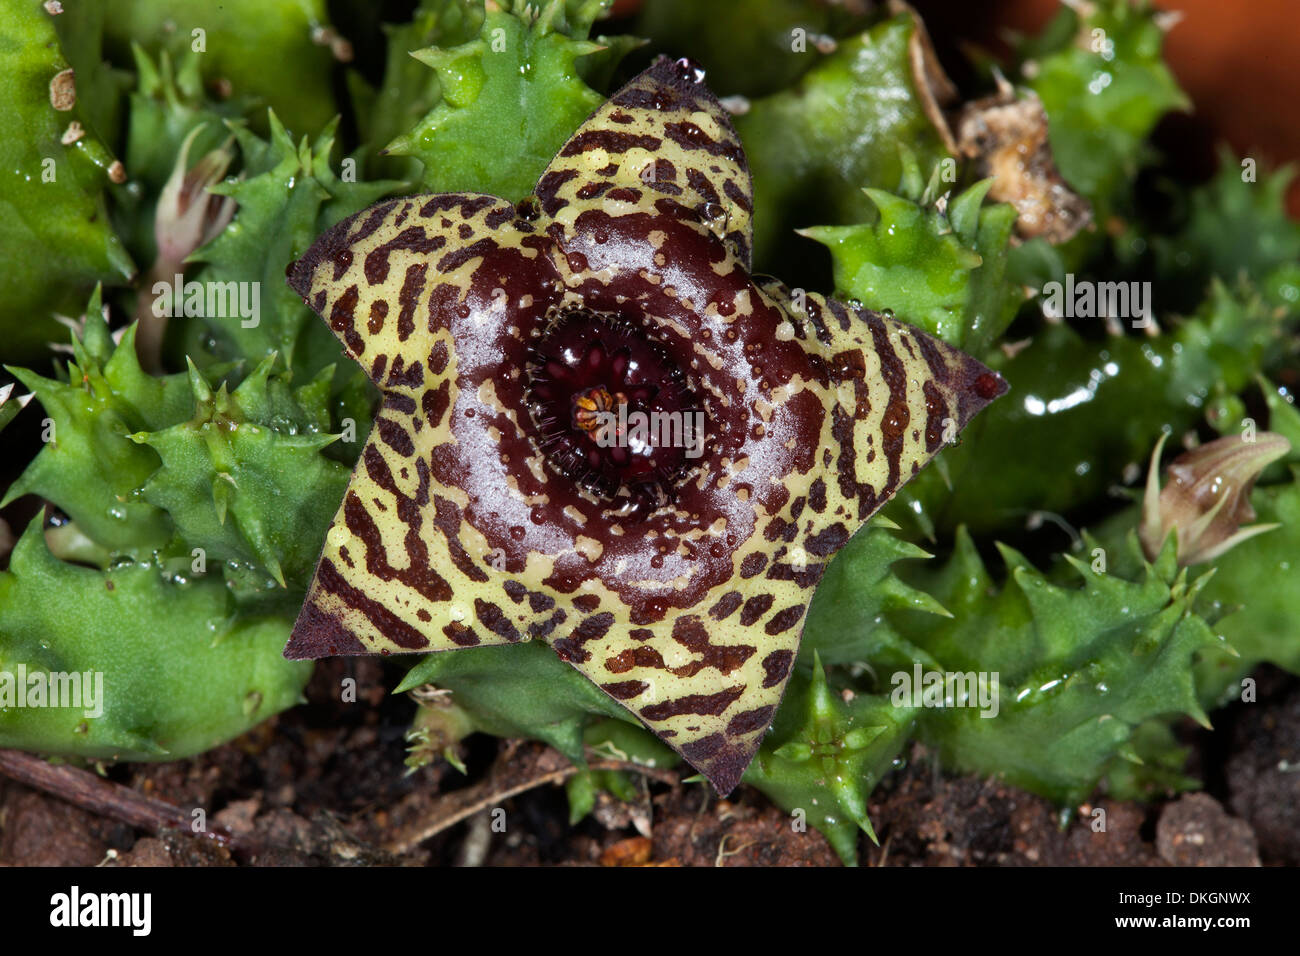 Unusual brown and yellow spotted flower and green stems of Huernia zebrina - a succulent plant species Stock Photo